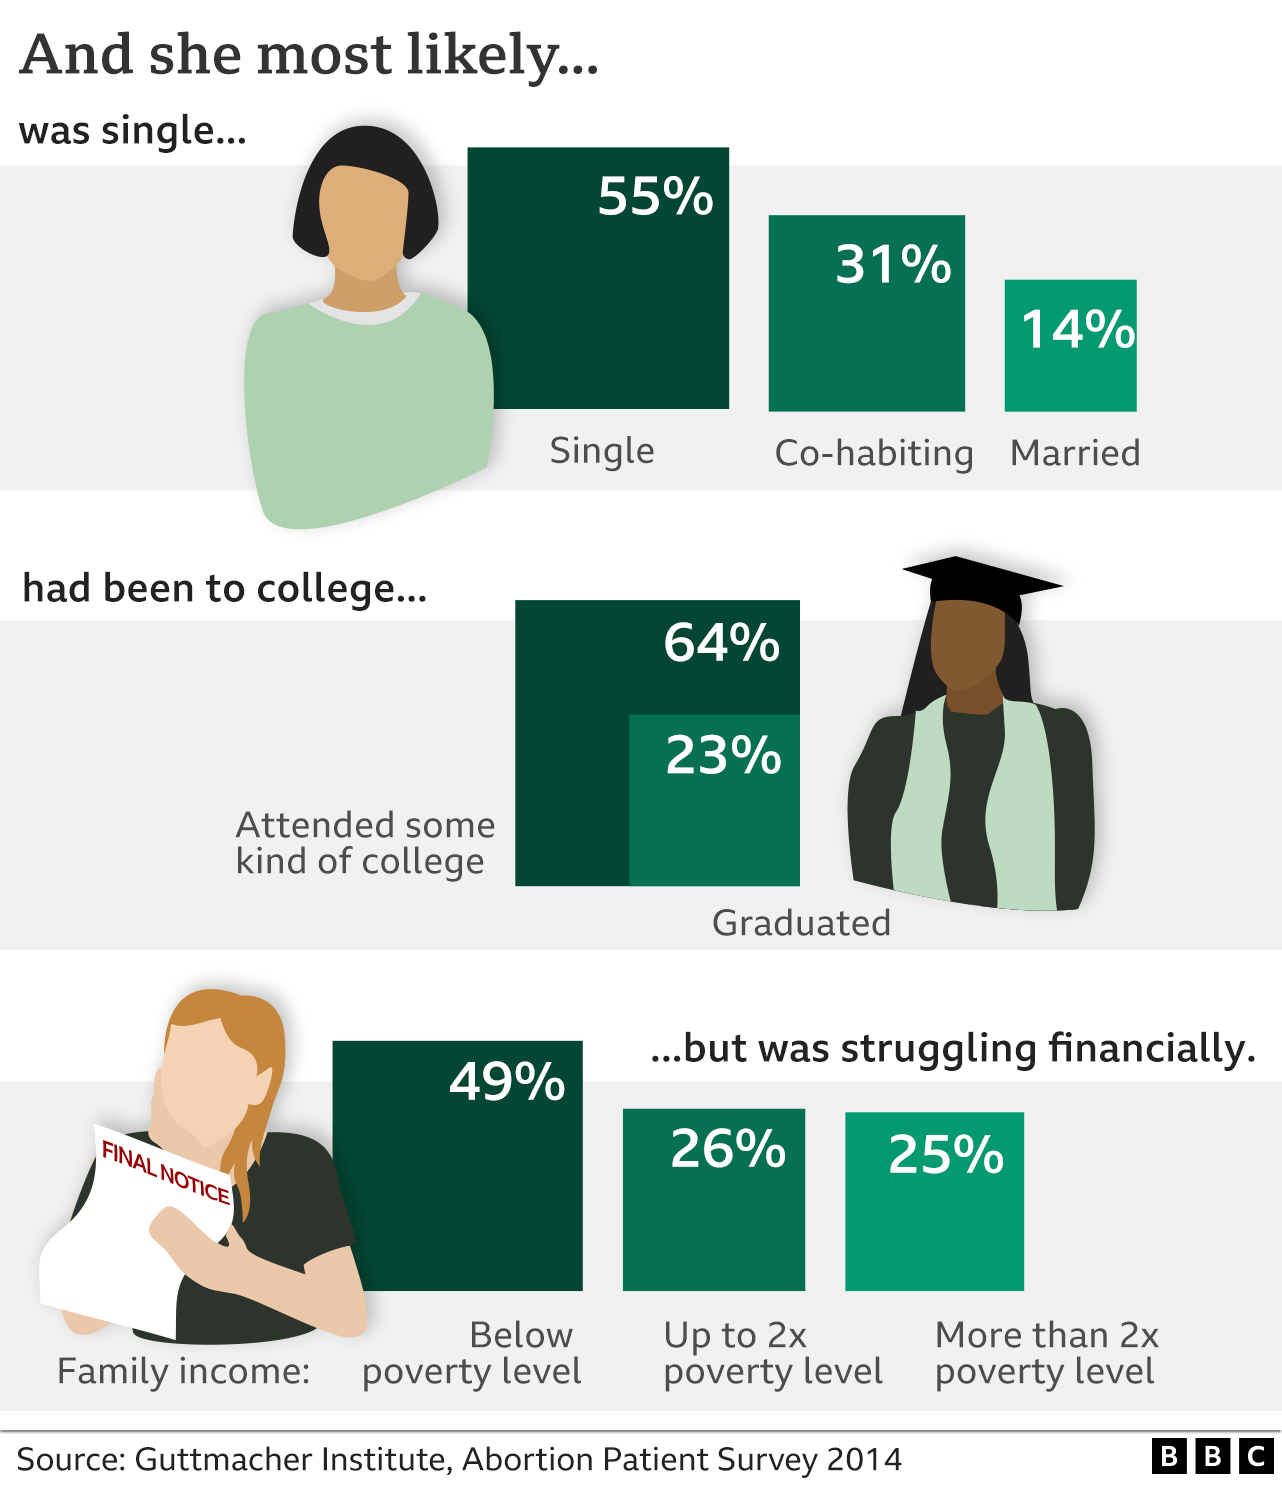 Graphic showing that, according to the Guttmacher Institute 2014 Abortion Patient Survey, women getting abortions are most likely to be single (55%), have been to college (64%) but probably not graduated (23%) and be struggling financially (49% with family income below the poverty level)